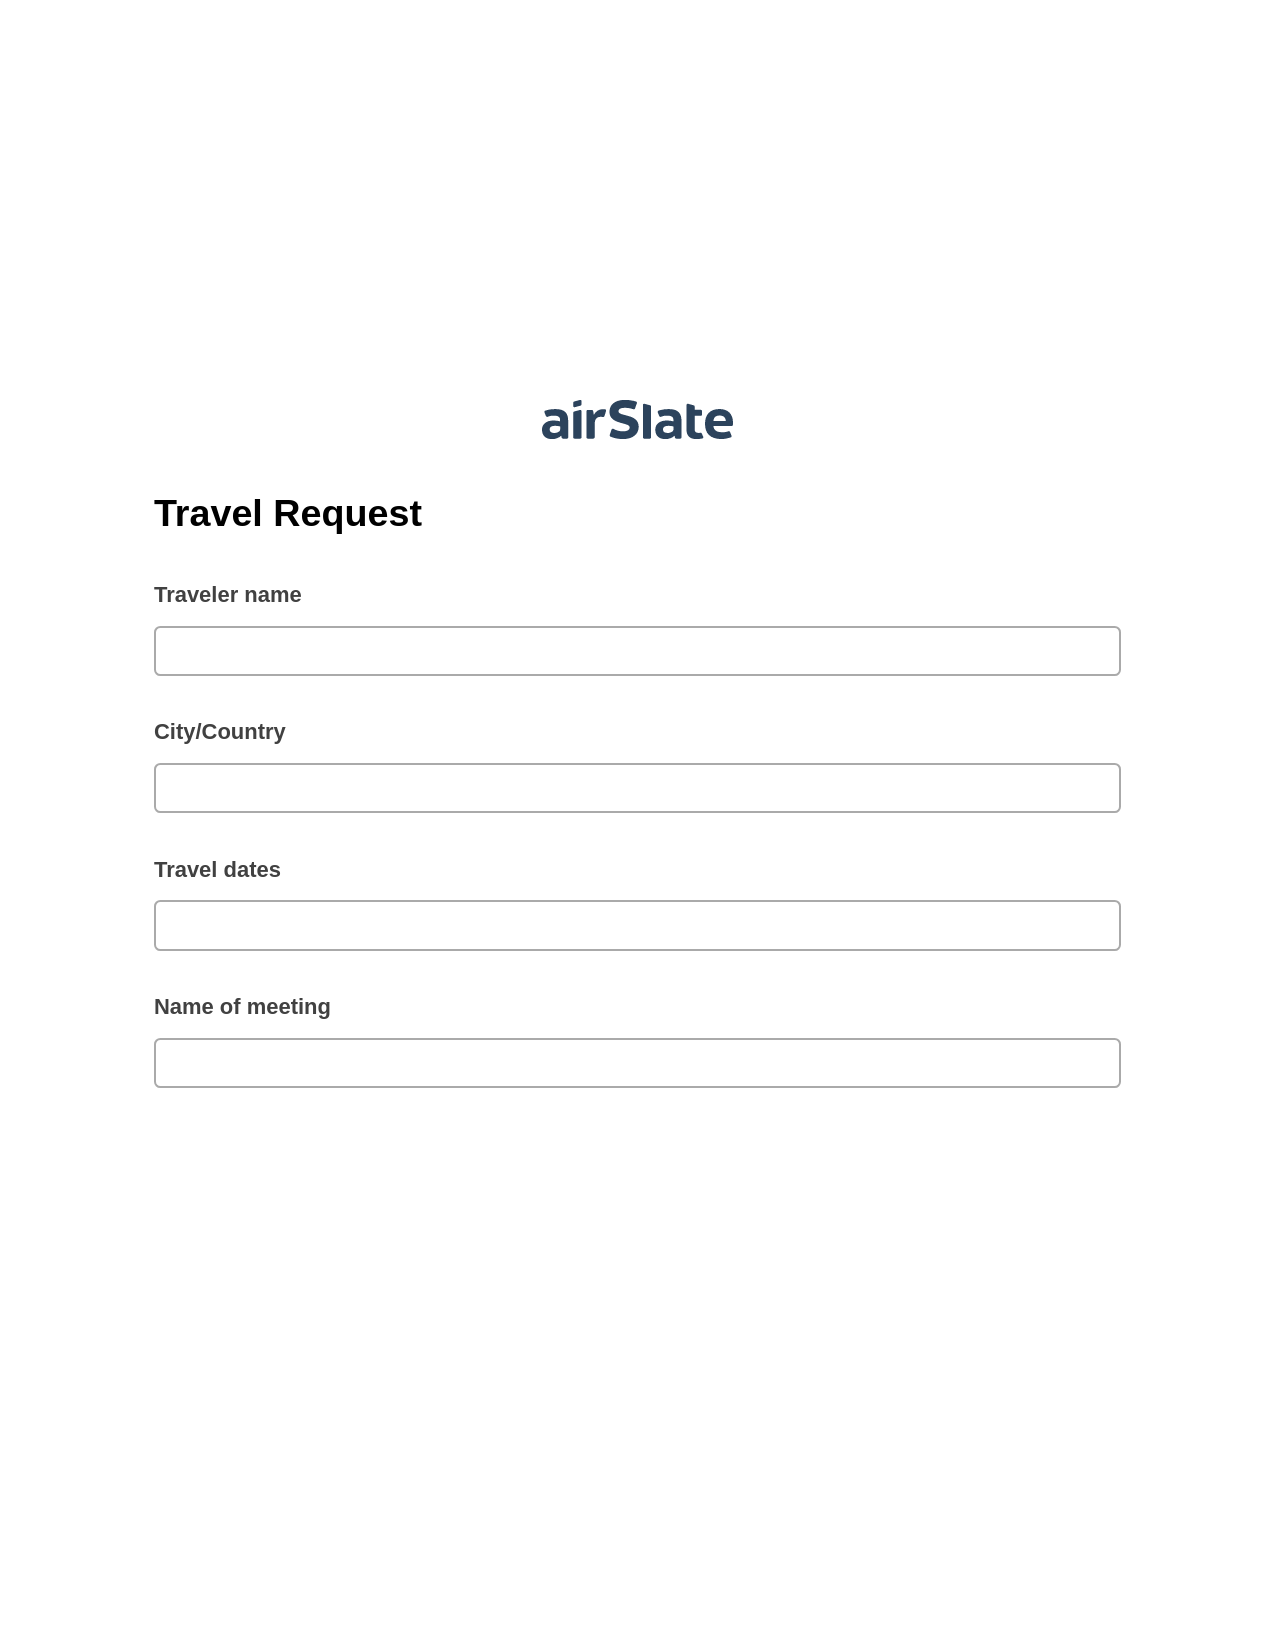 Travel Request Pre-fill from CSV File Bot, Reminder Bot, Box Bot